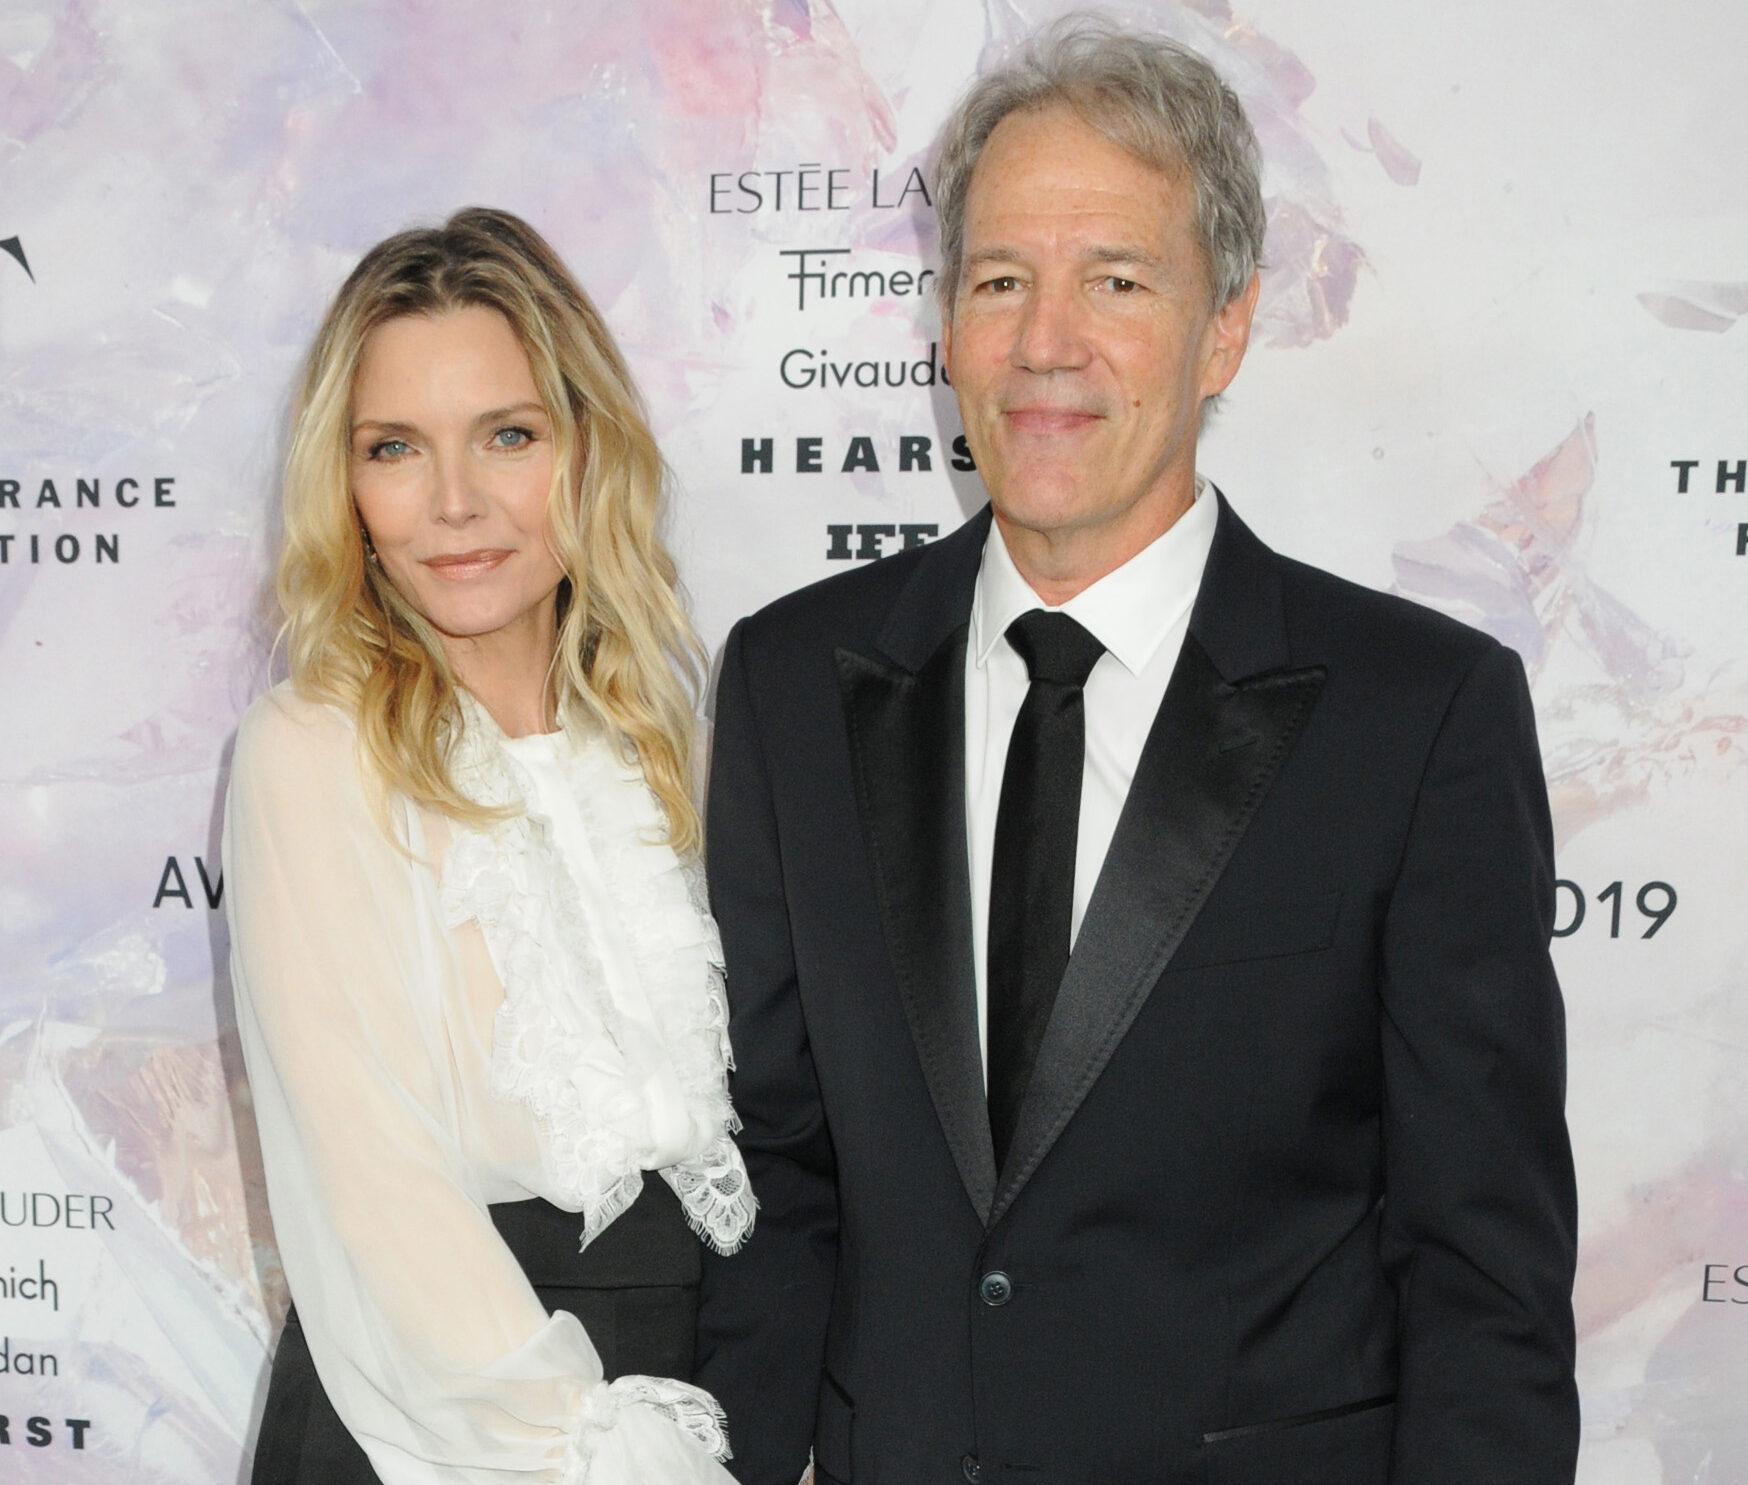 David E. Kelley and Michelle Pfeiffer at the 2019 Fragrance Foundation Awards